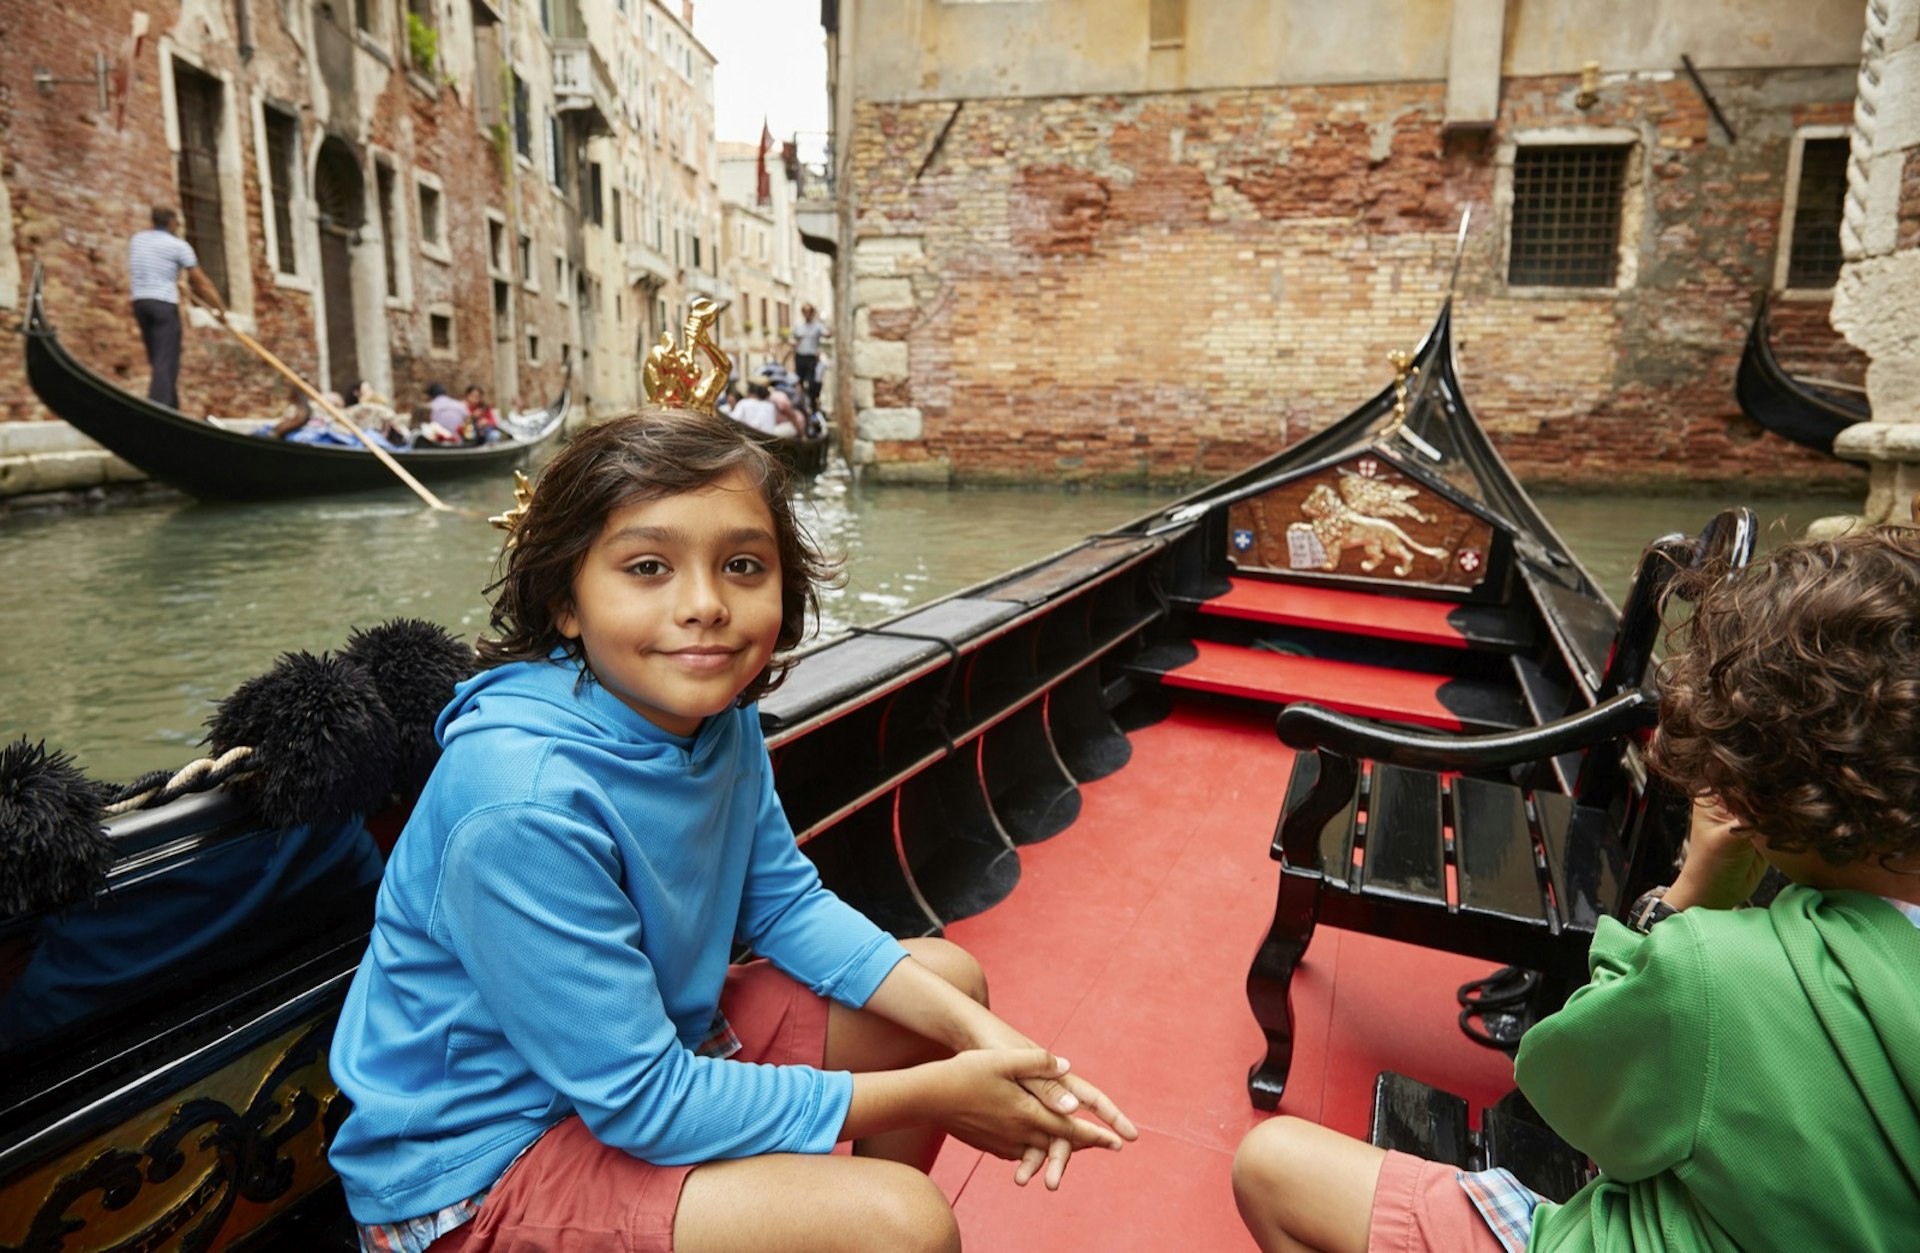 Two boys sit on a red gondola floating through Venice, one boy is looking at the camera and the other is looking away